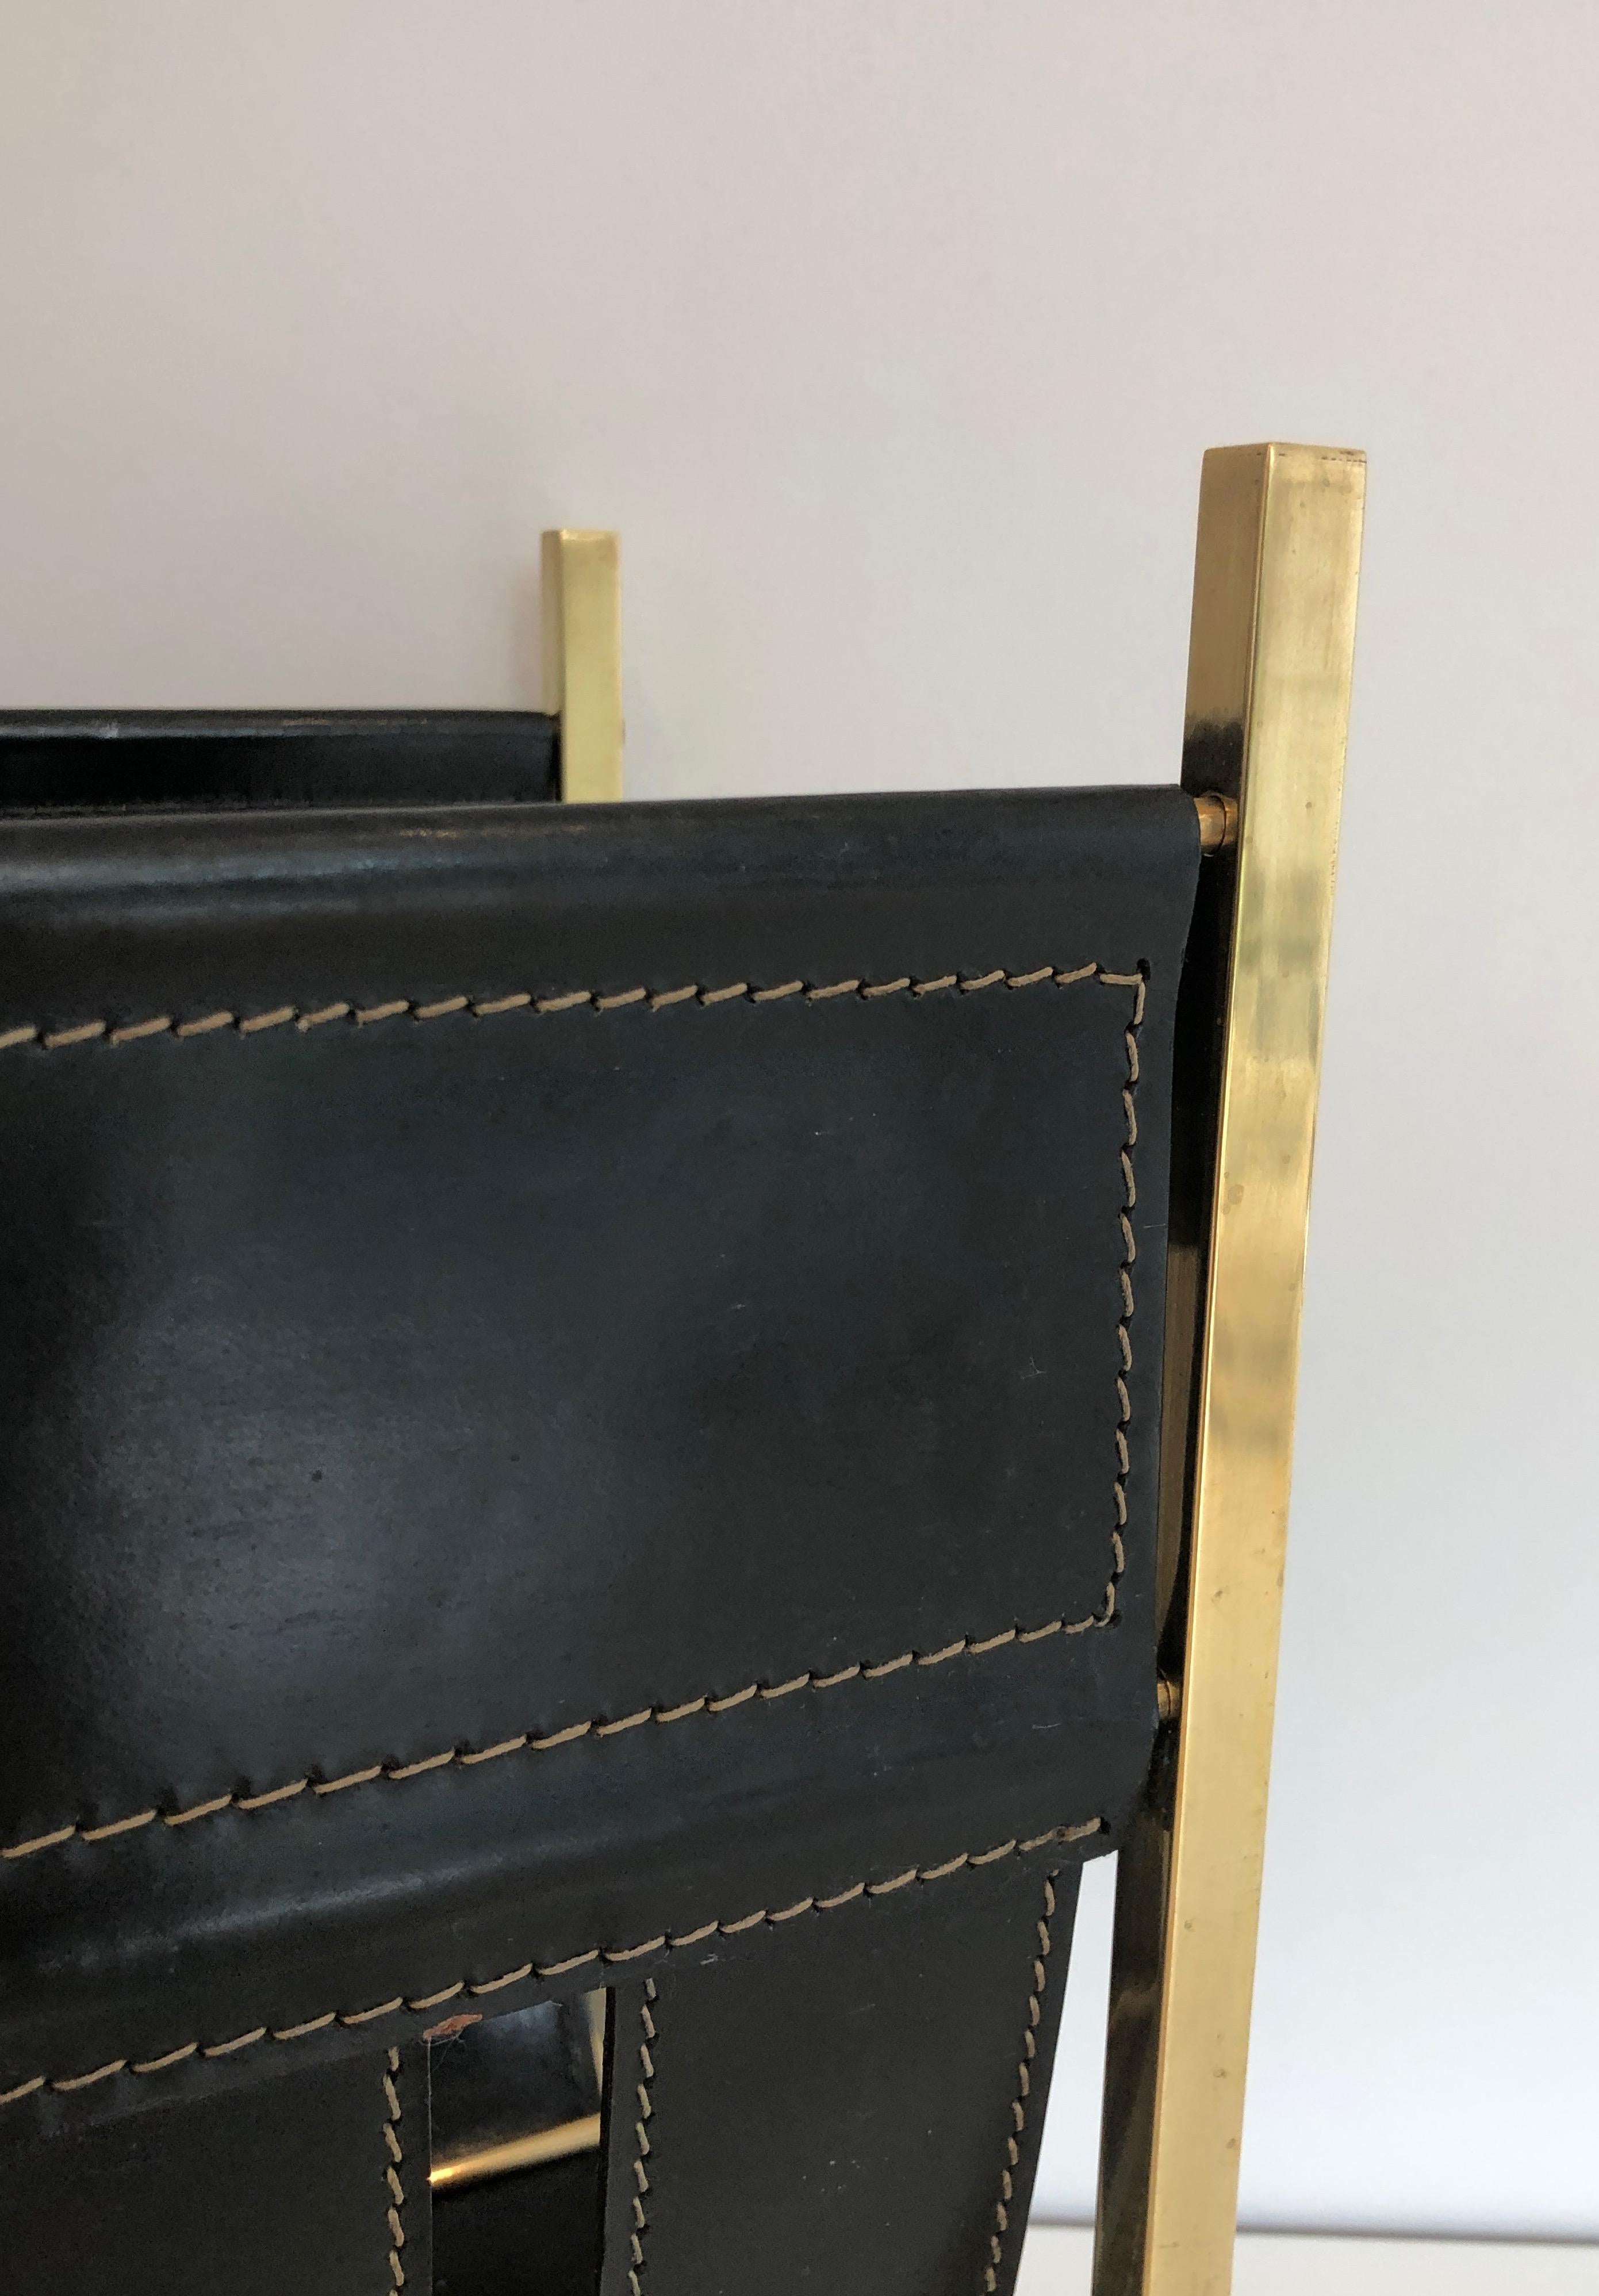 Hand-Bag Brass and Leather Magazine Rack by Jacques Adnet, circa 1940 For Sale 2